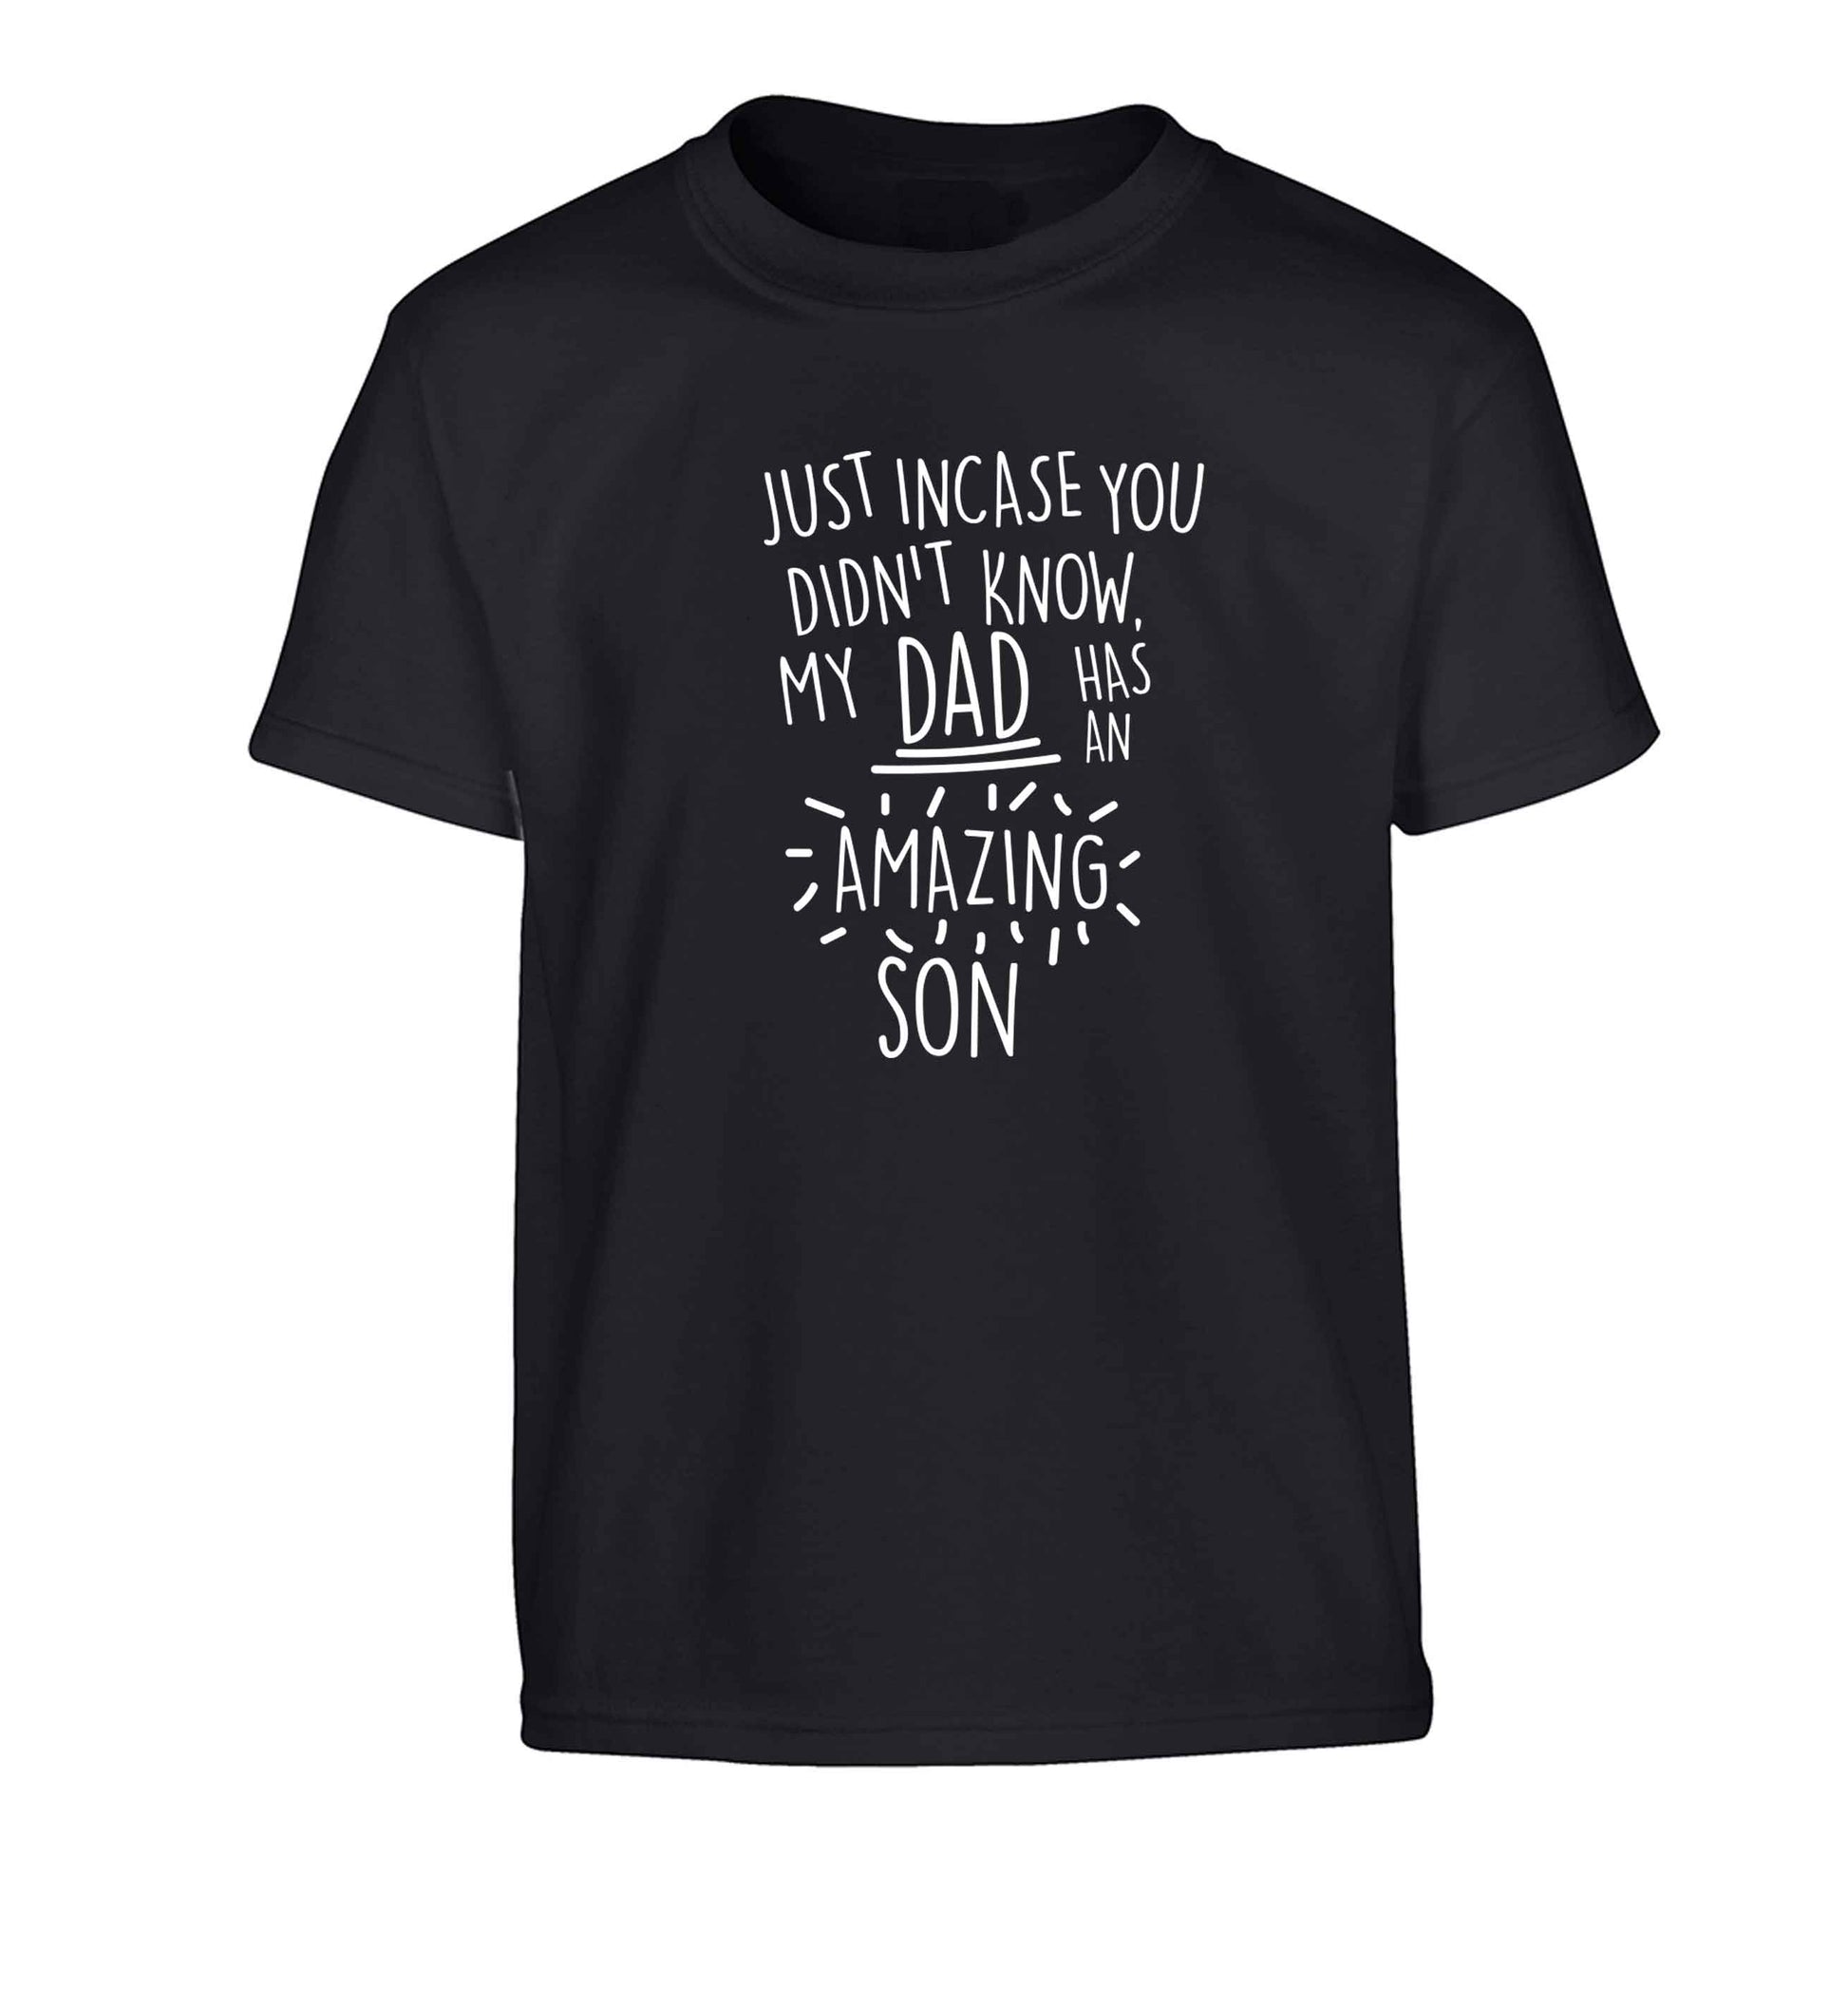 Just incase you didn't know my dad has an amazing son Children's black Tshirt 12-13 Years